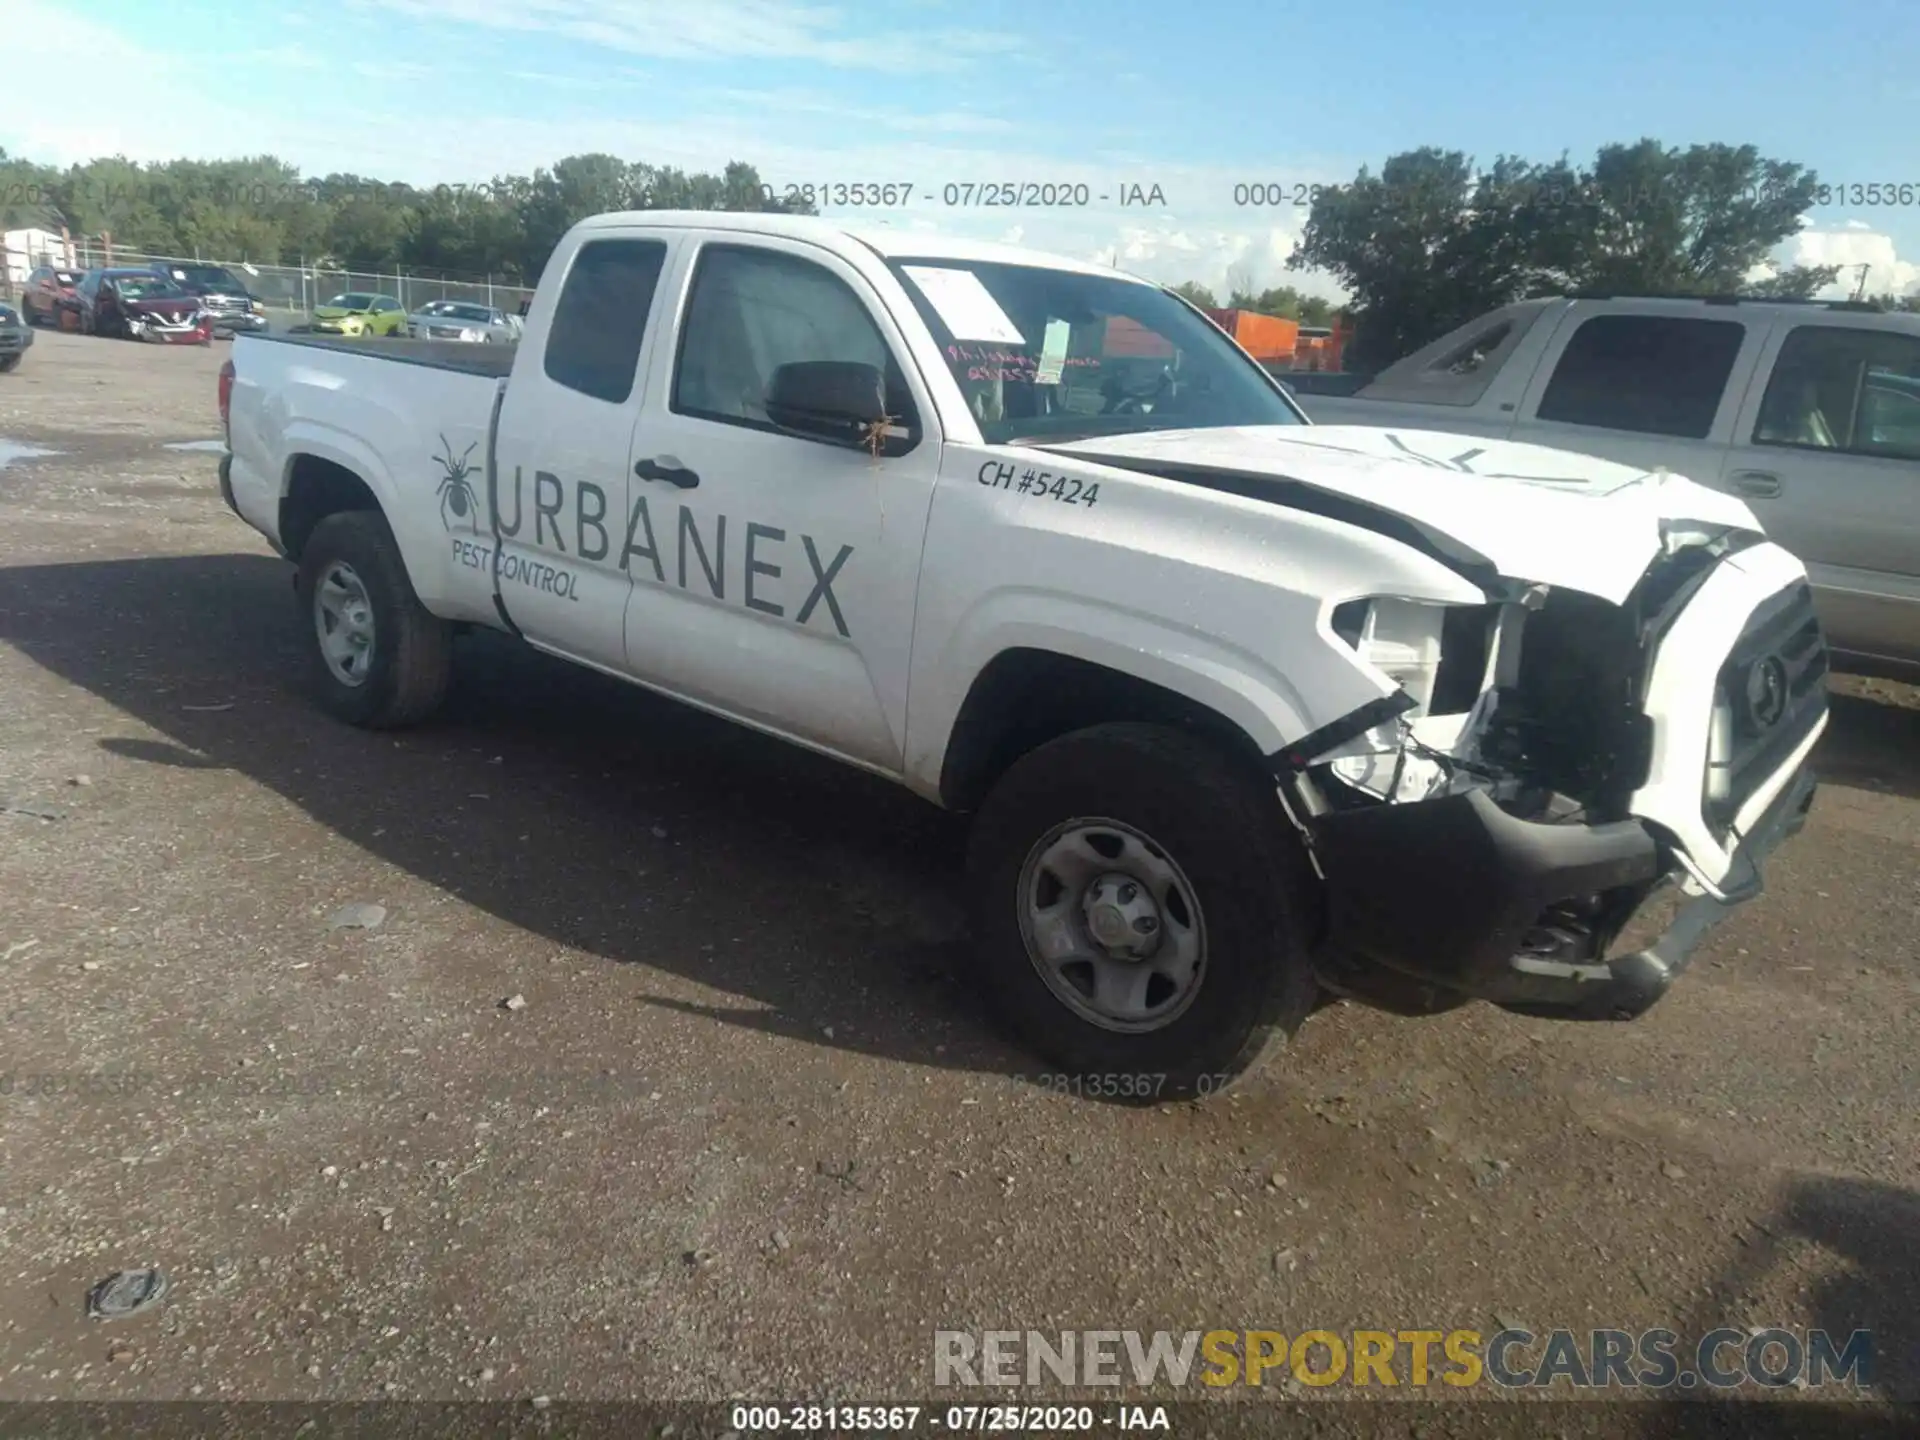 1 Photograph of a damaged car 5TFRX5GN7LX172748 TOYOTA TACOMA 2WD 2020